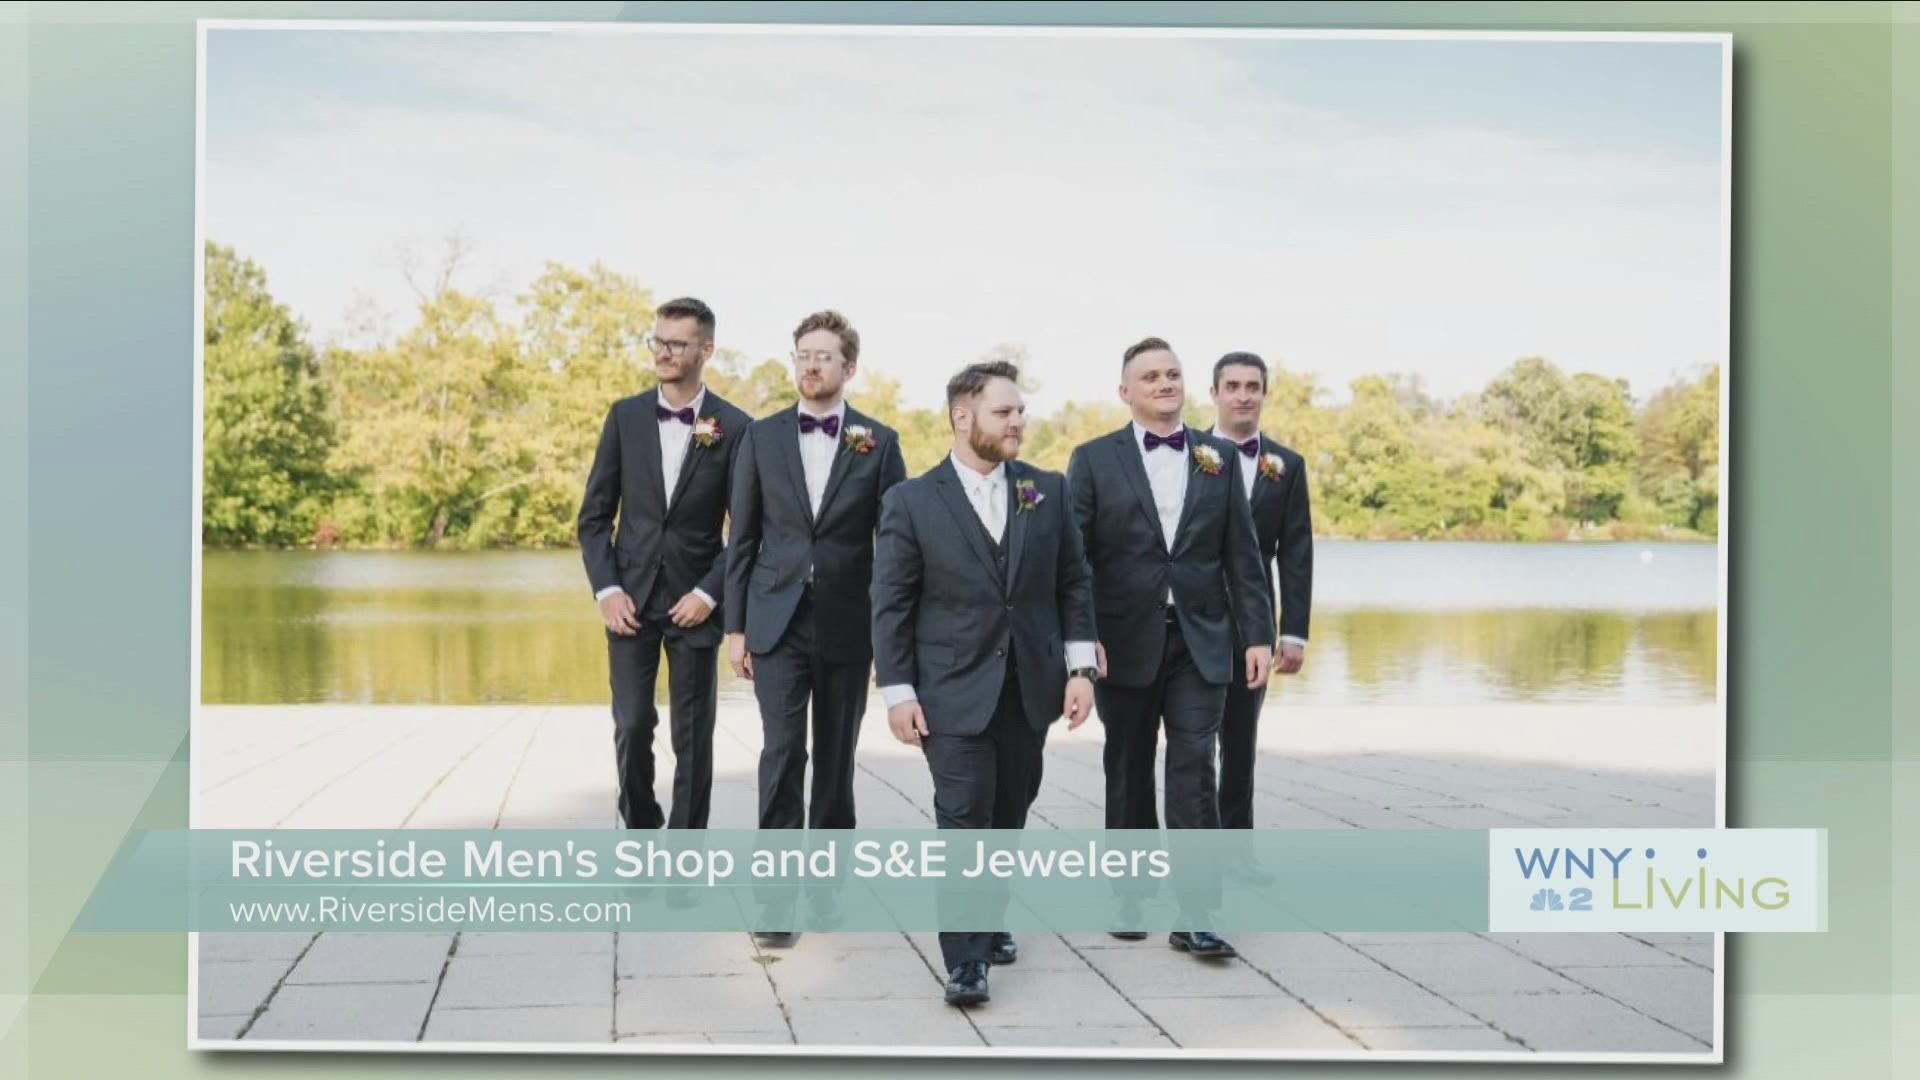 WNY Living - January 14th -Riverside Men's Shop THIS VIDEO IS SPONSORED BY RIVERSIDE MEN'S SHOP